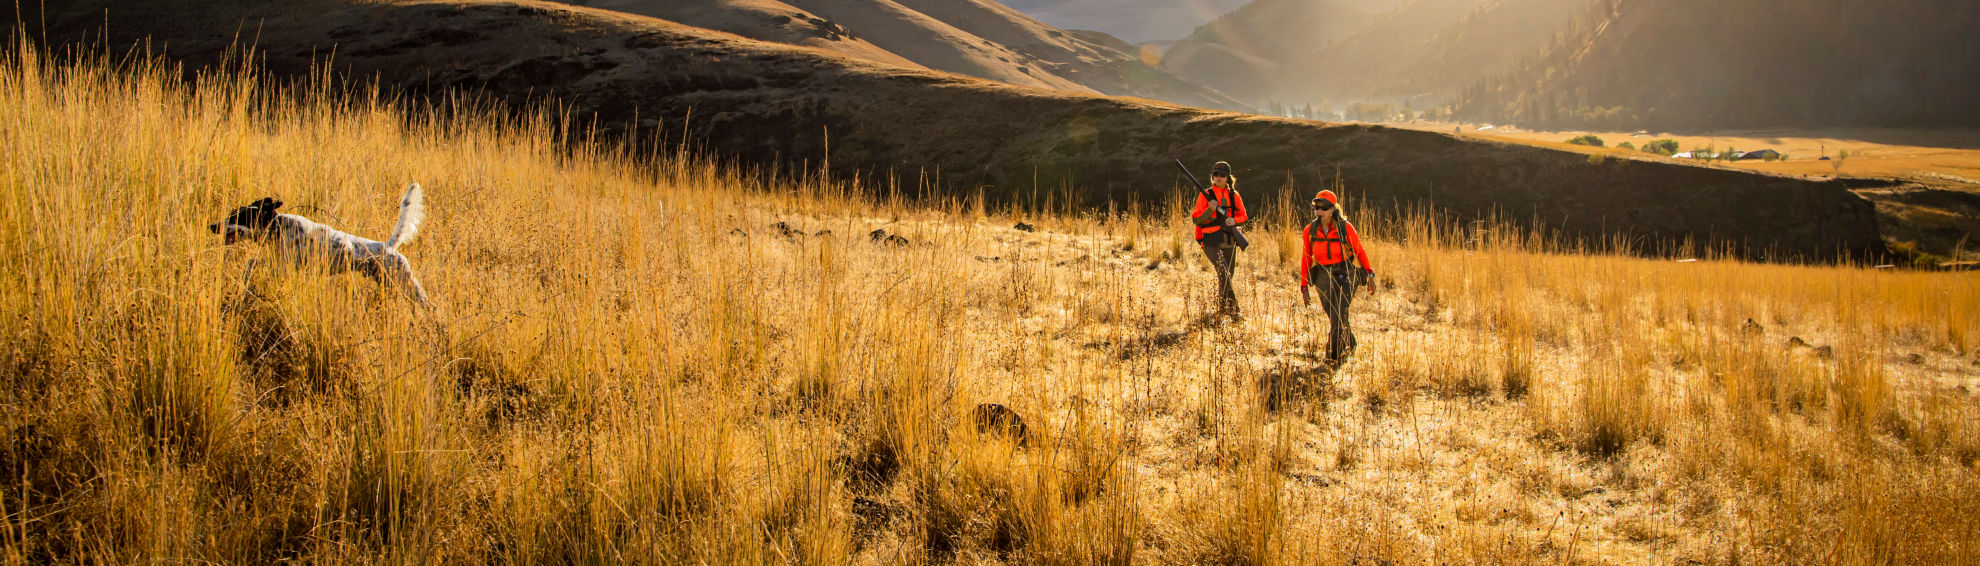 Two hunters follow a dog over hills covered in long golden grass